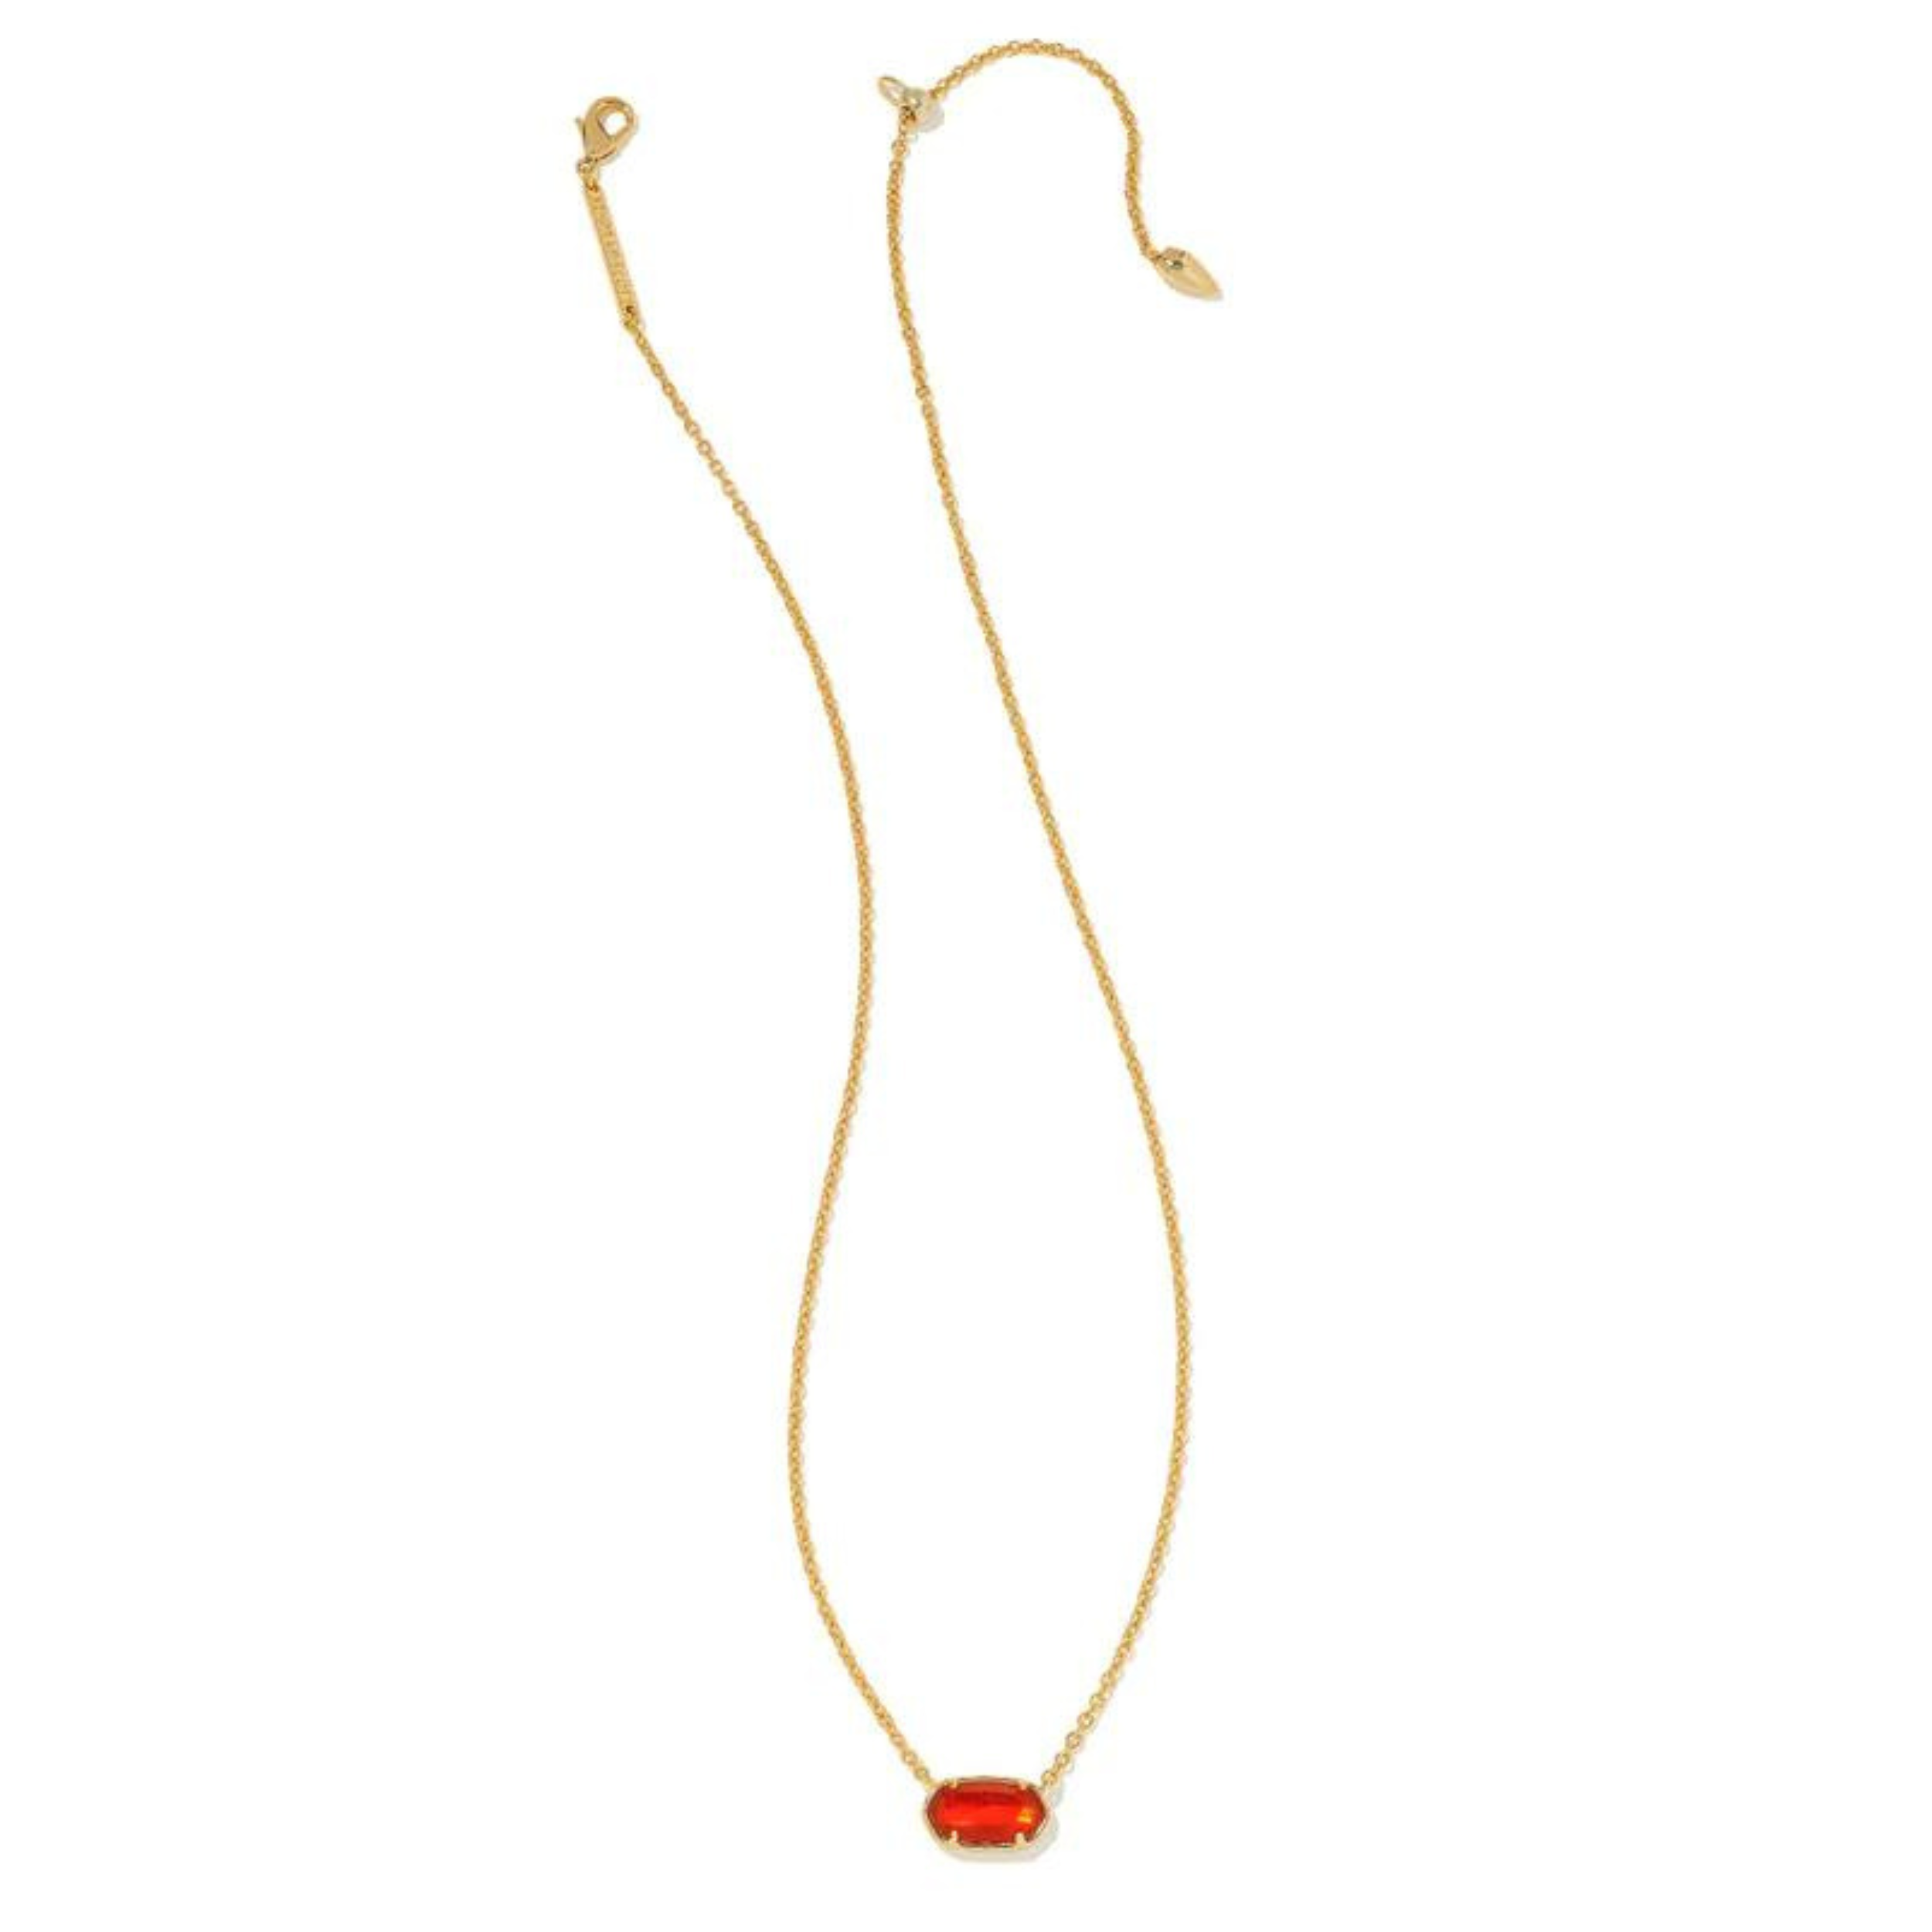 Kendra Scott | Grayson Gold Pendant Necklace in Red Illusion - Giddy Up Glamour Boutique